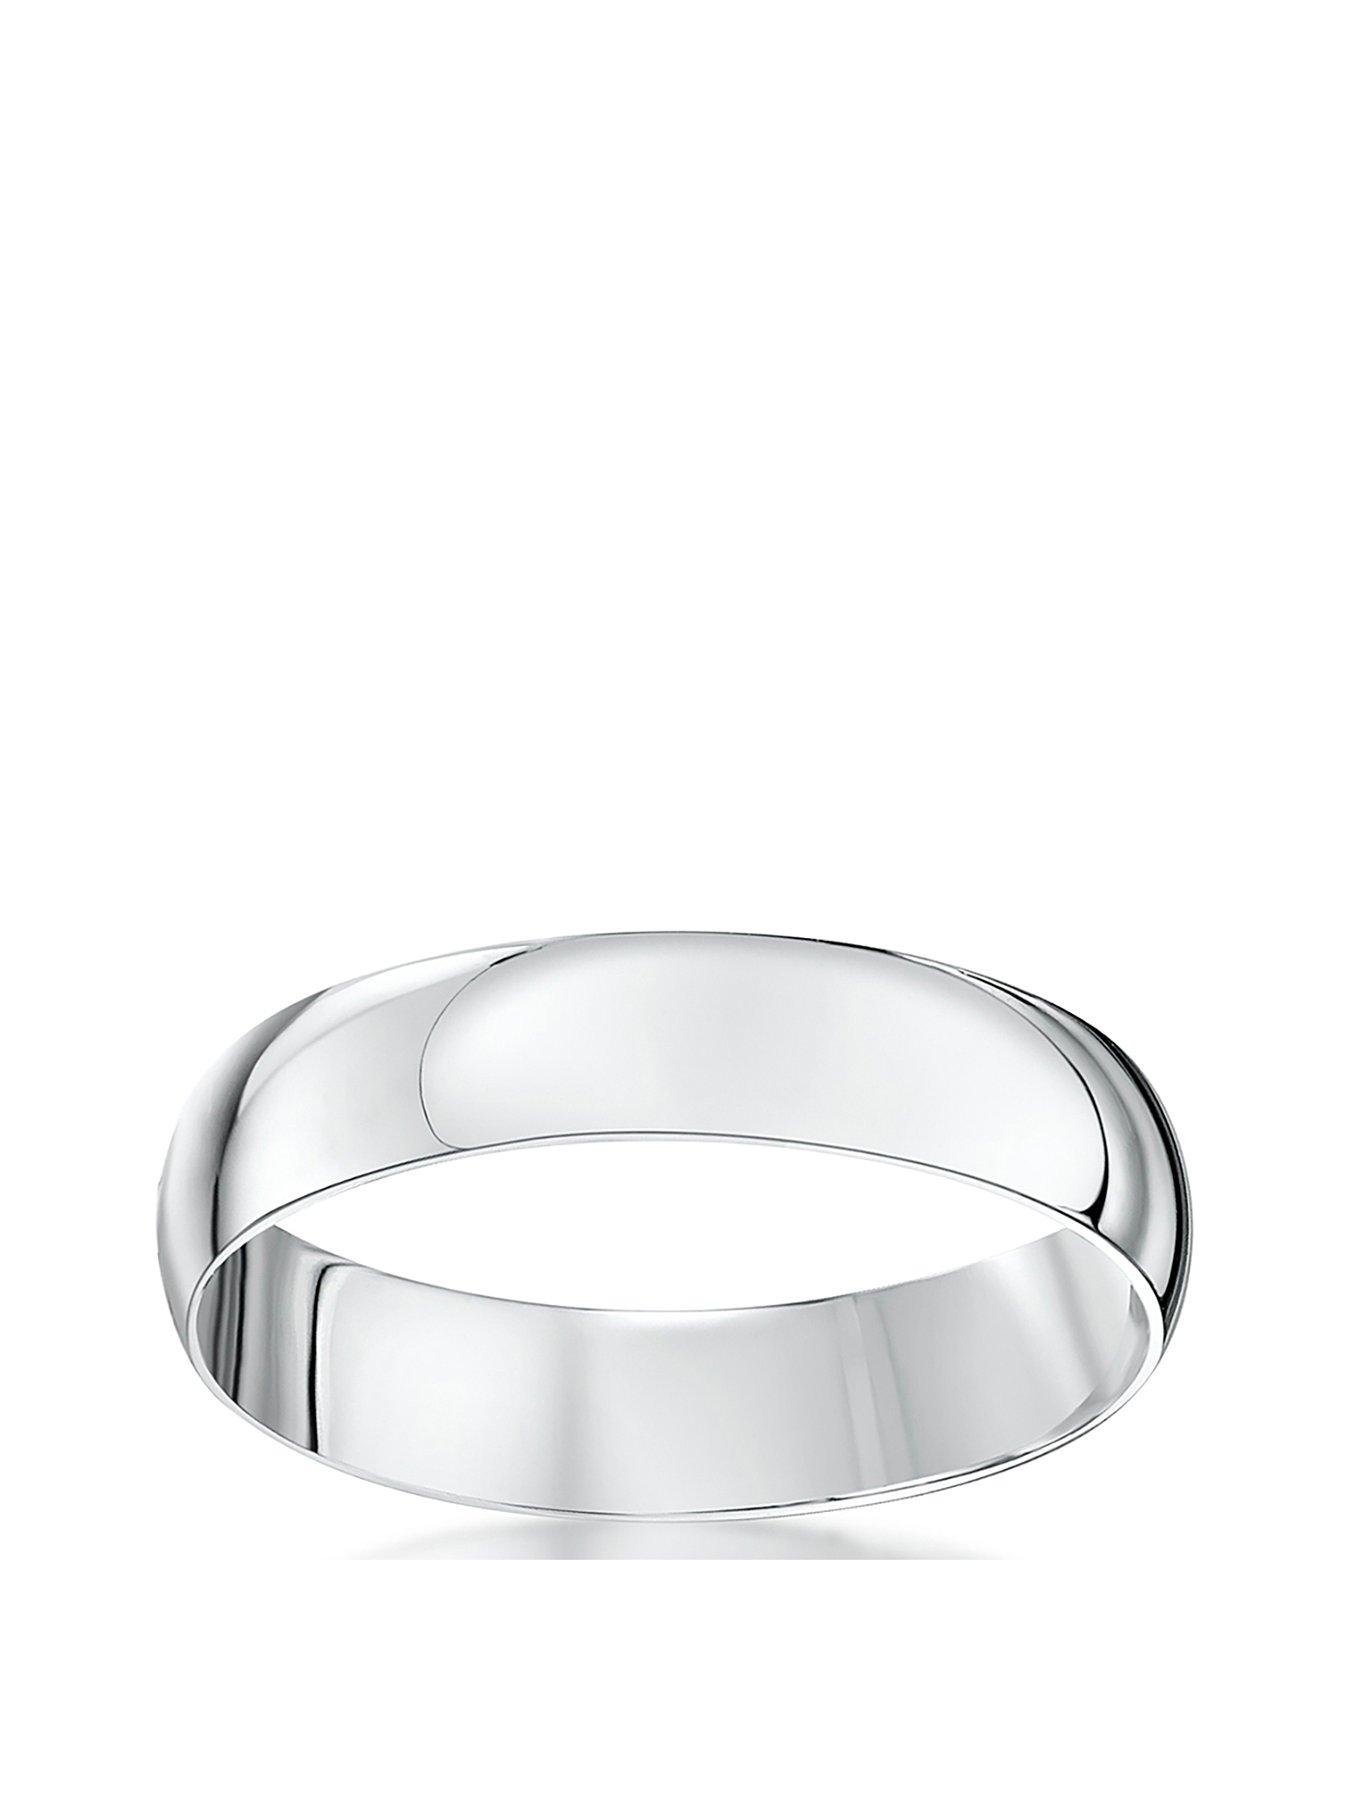 Love GOLD 9ct White Gold Personalised Band Ring 4m | littlewoods.com